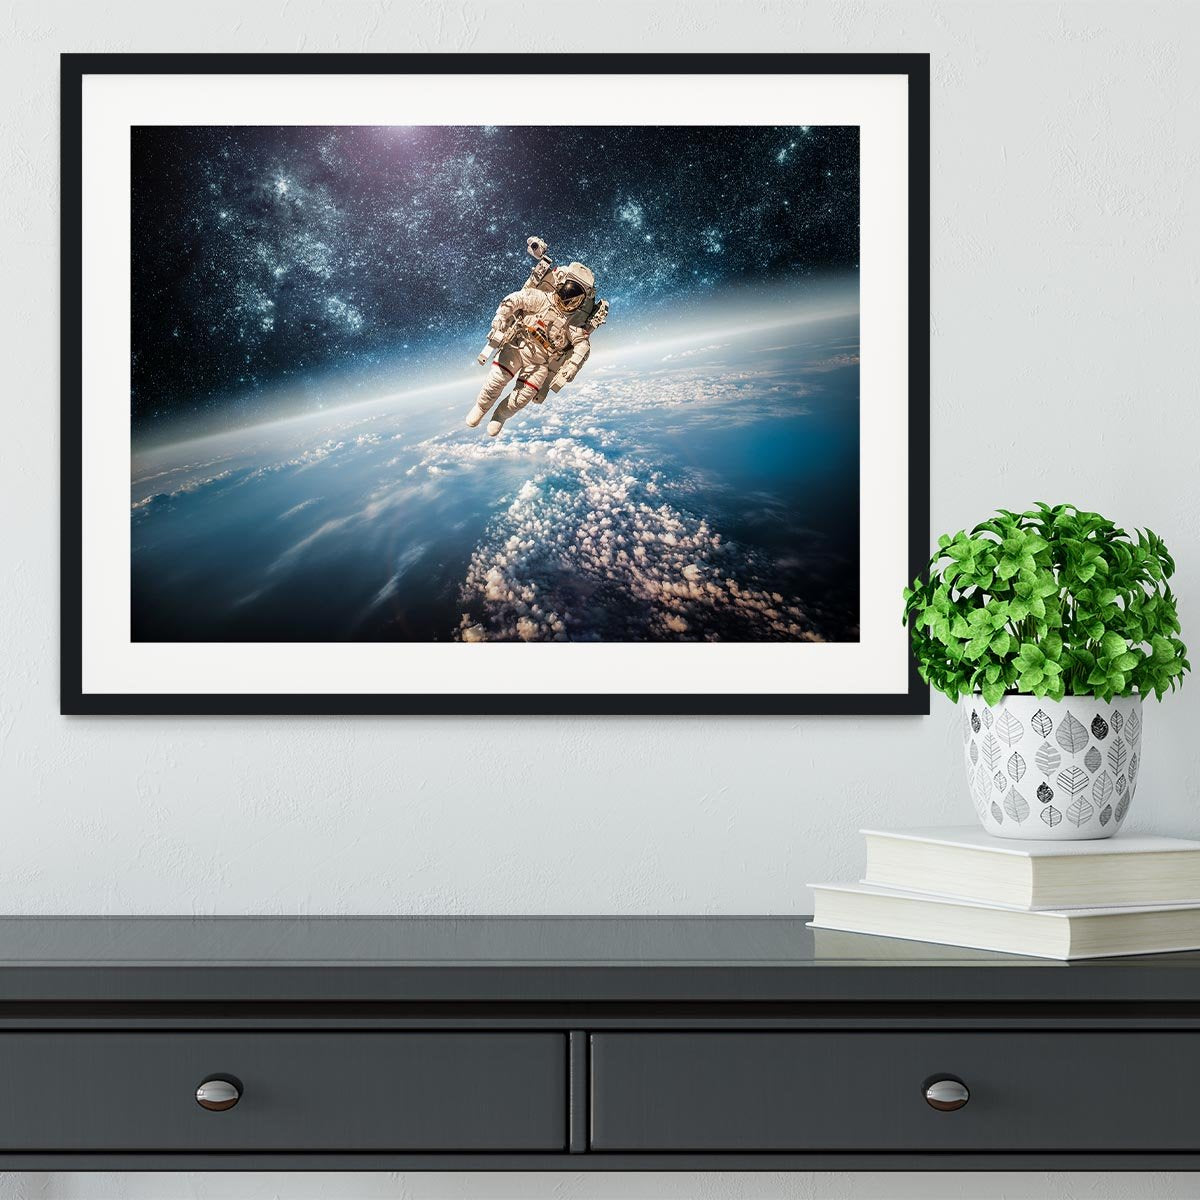 Astronaut in outer space planet earth Framed Print - Canvas Art Rocks - 1